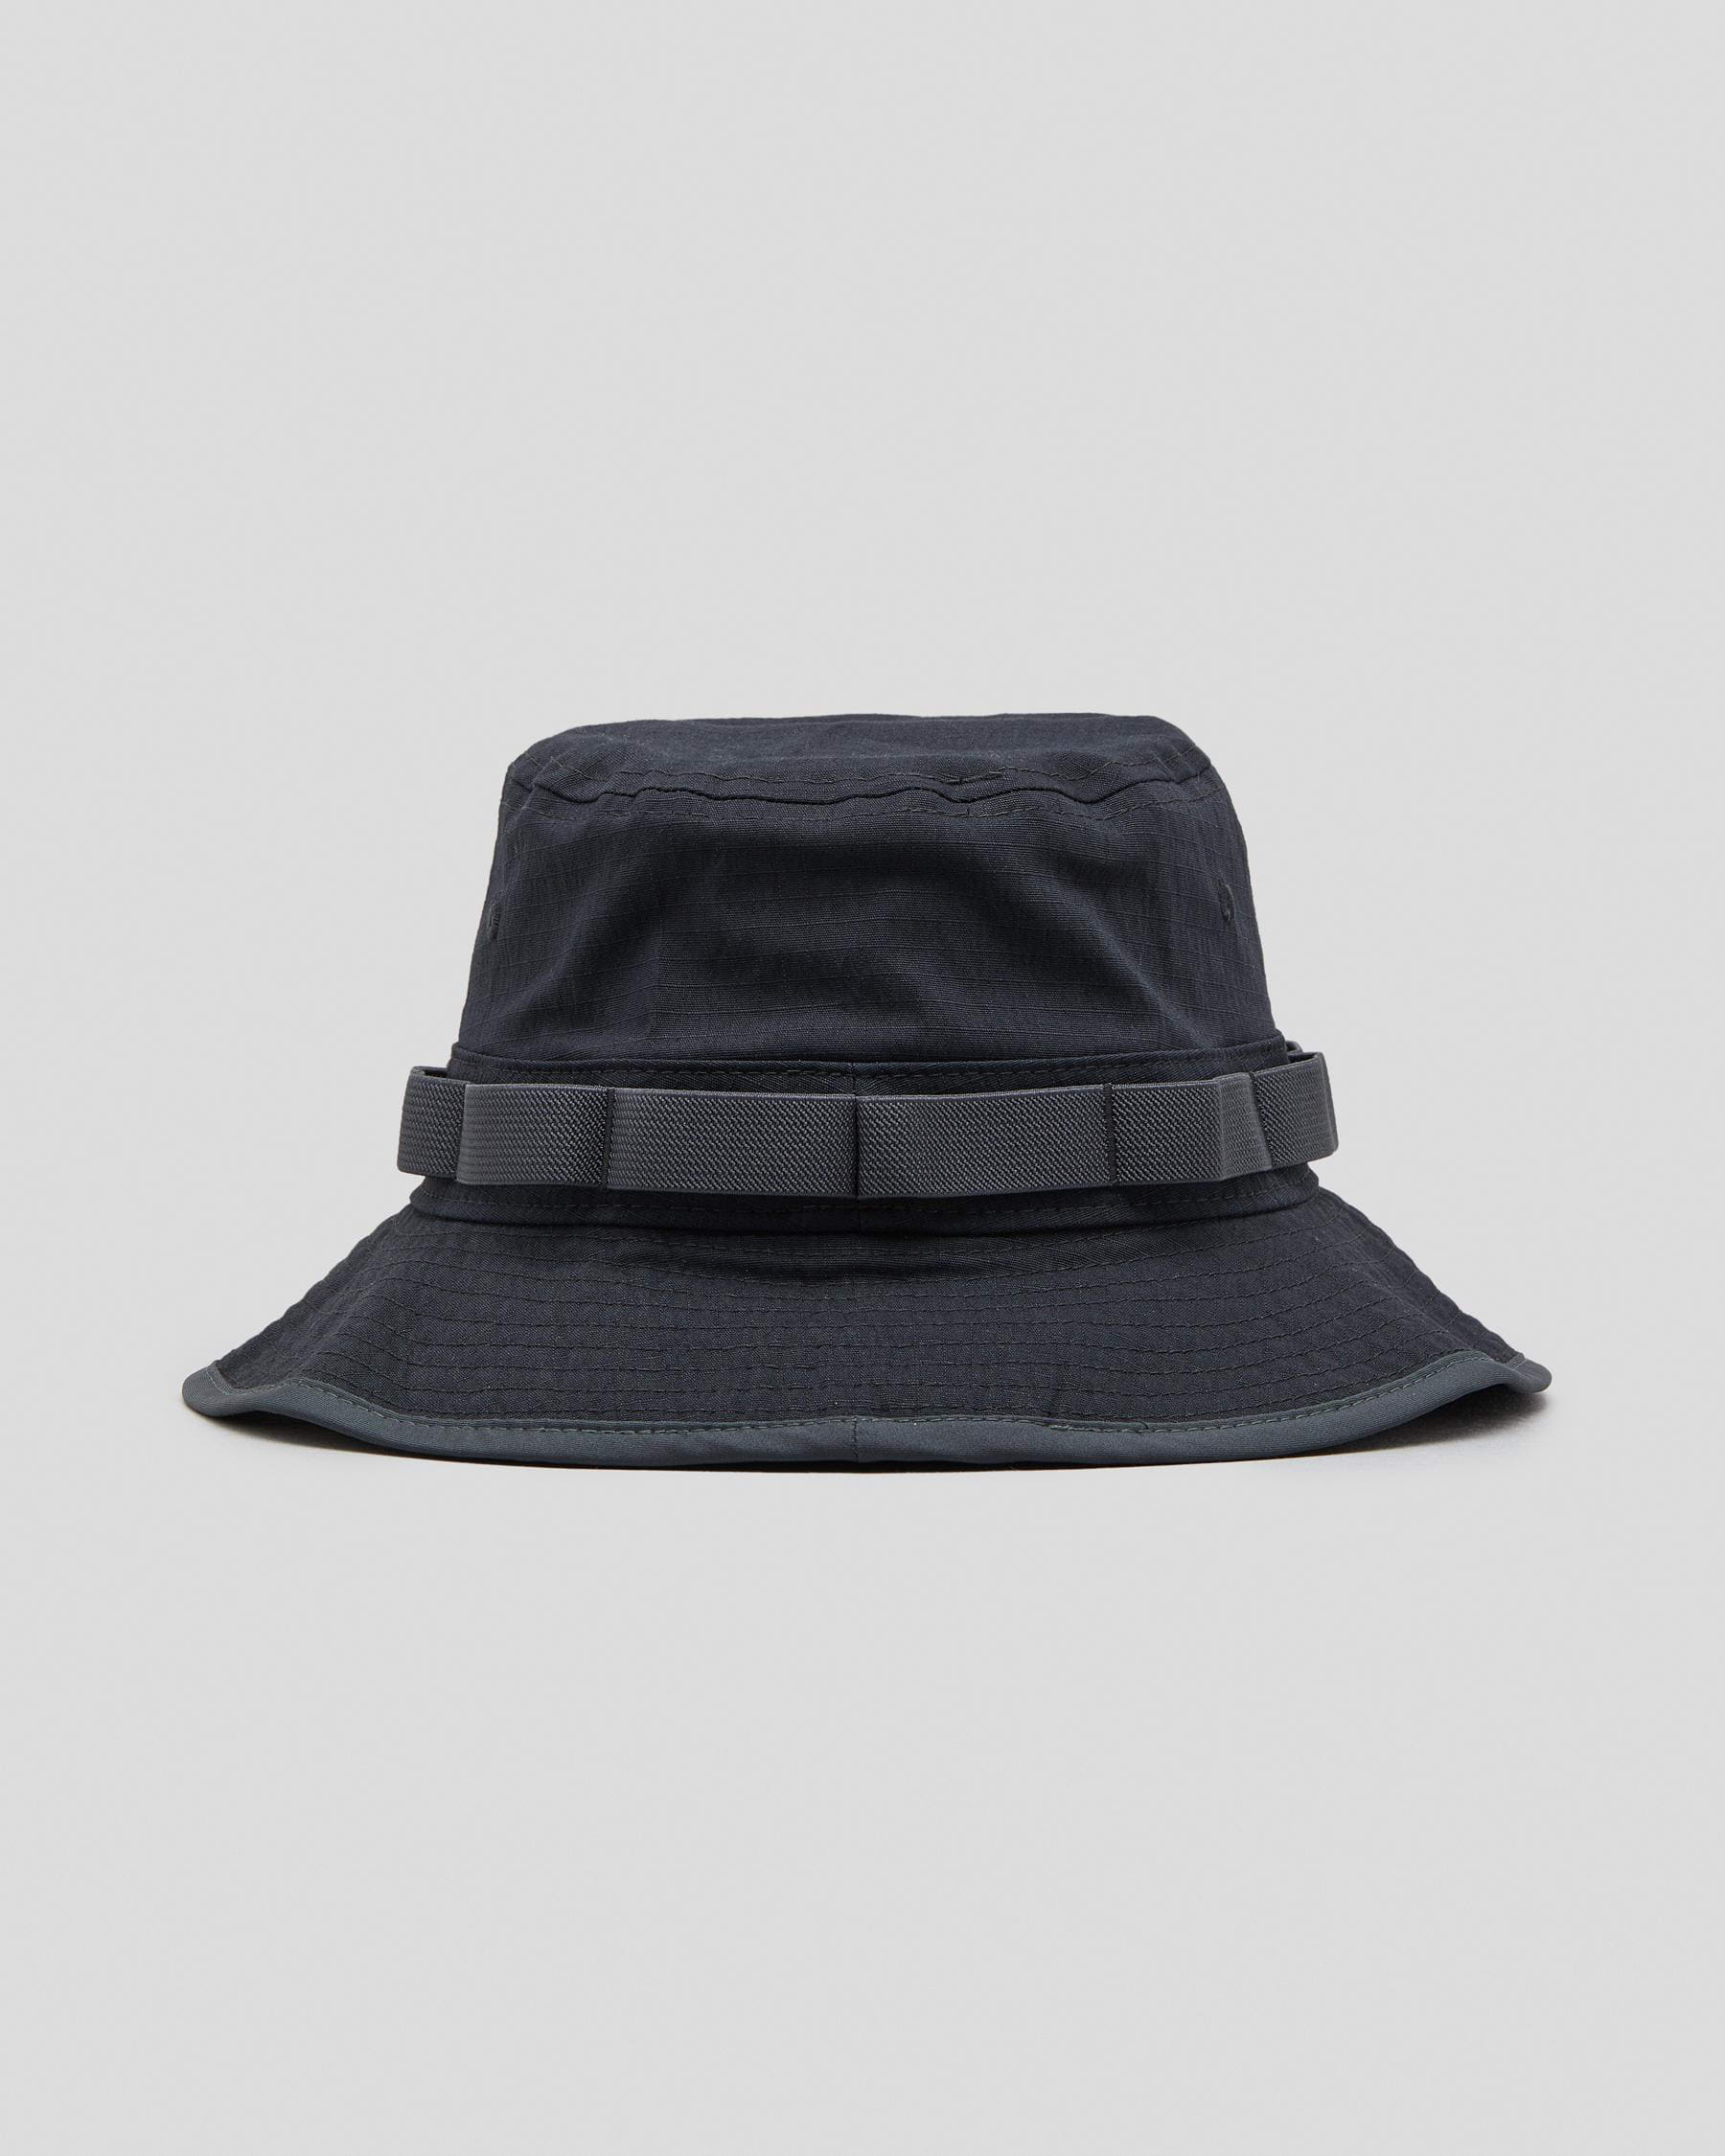 Nike Boonie Bucket hat In Black Fast Shipping & Easy Returns City